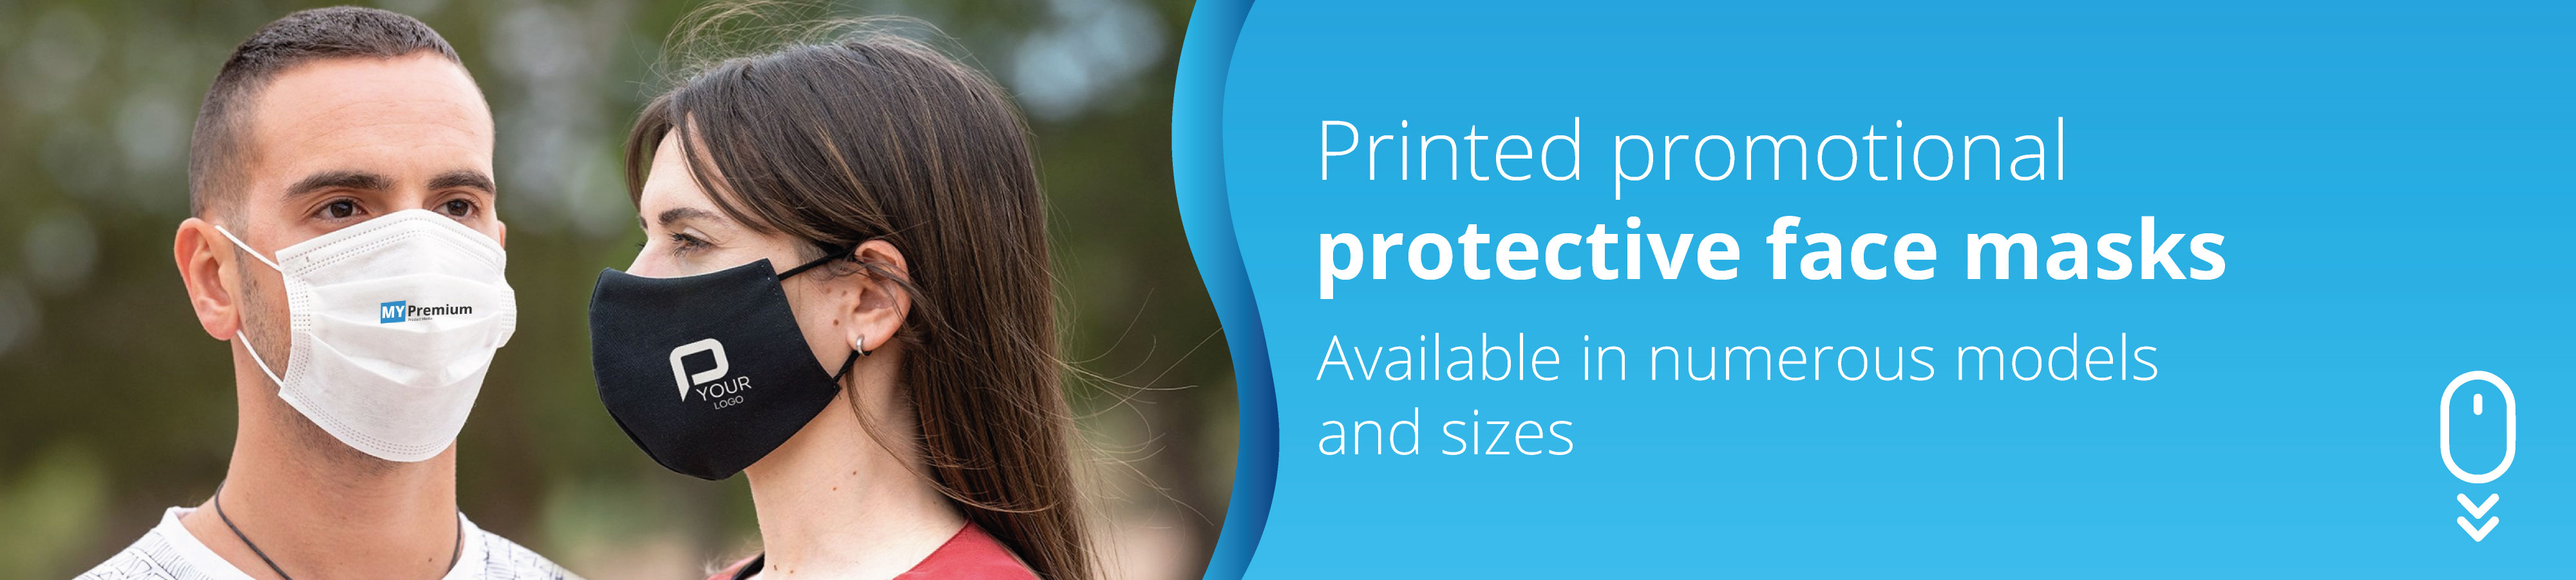 printed-promotional-protective-face-masks